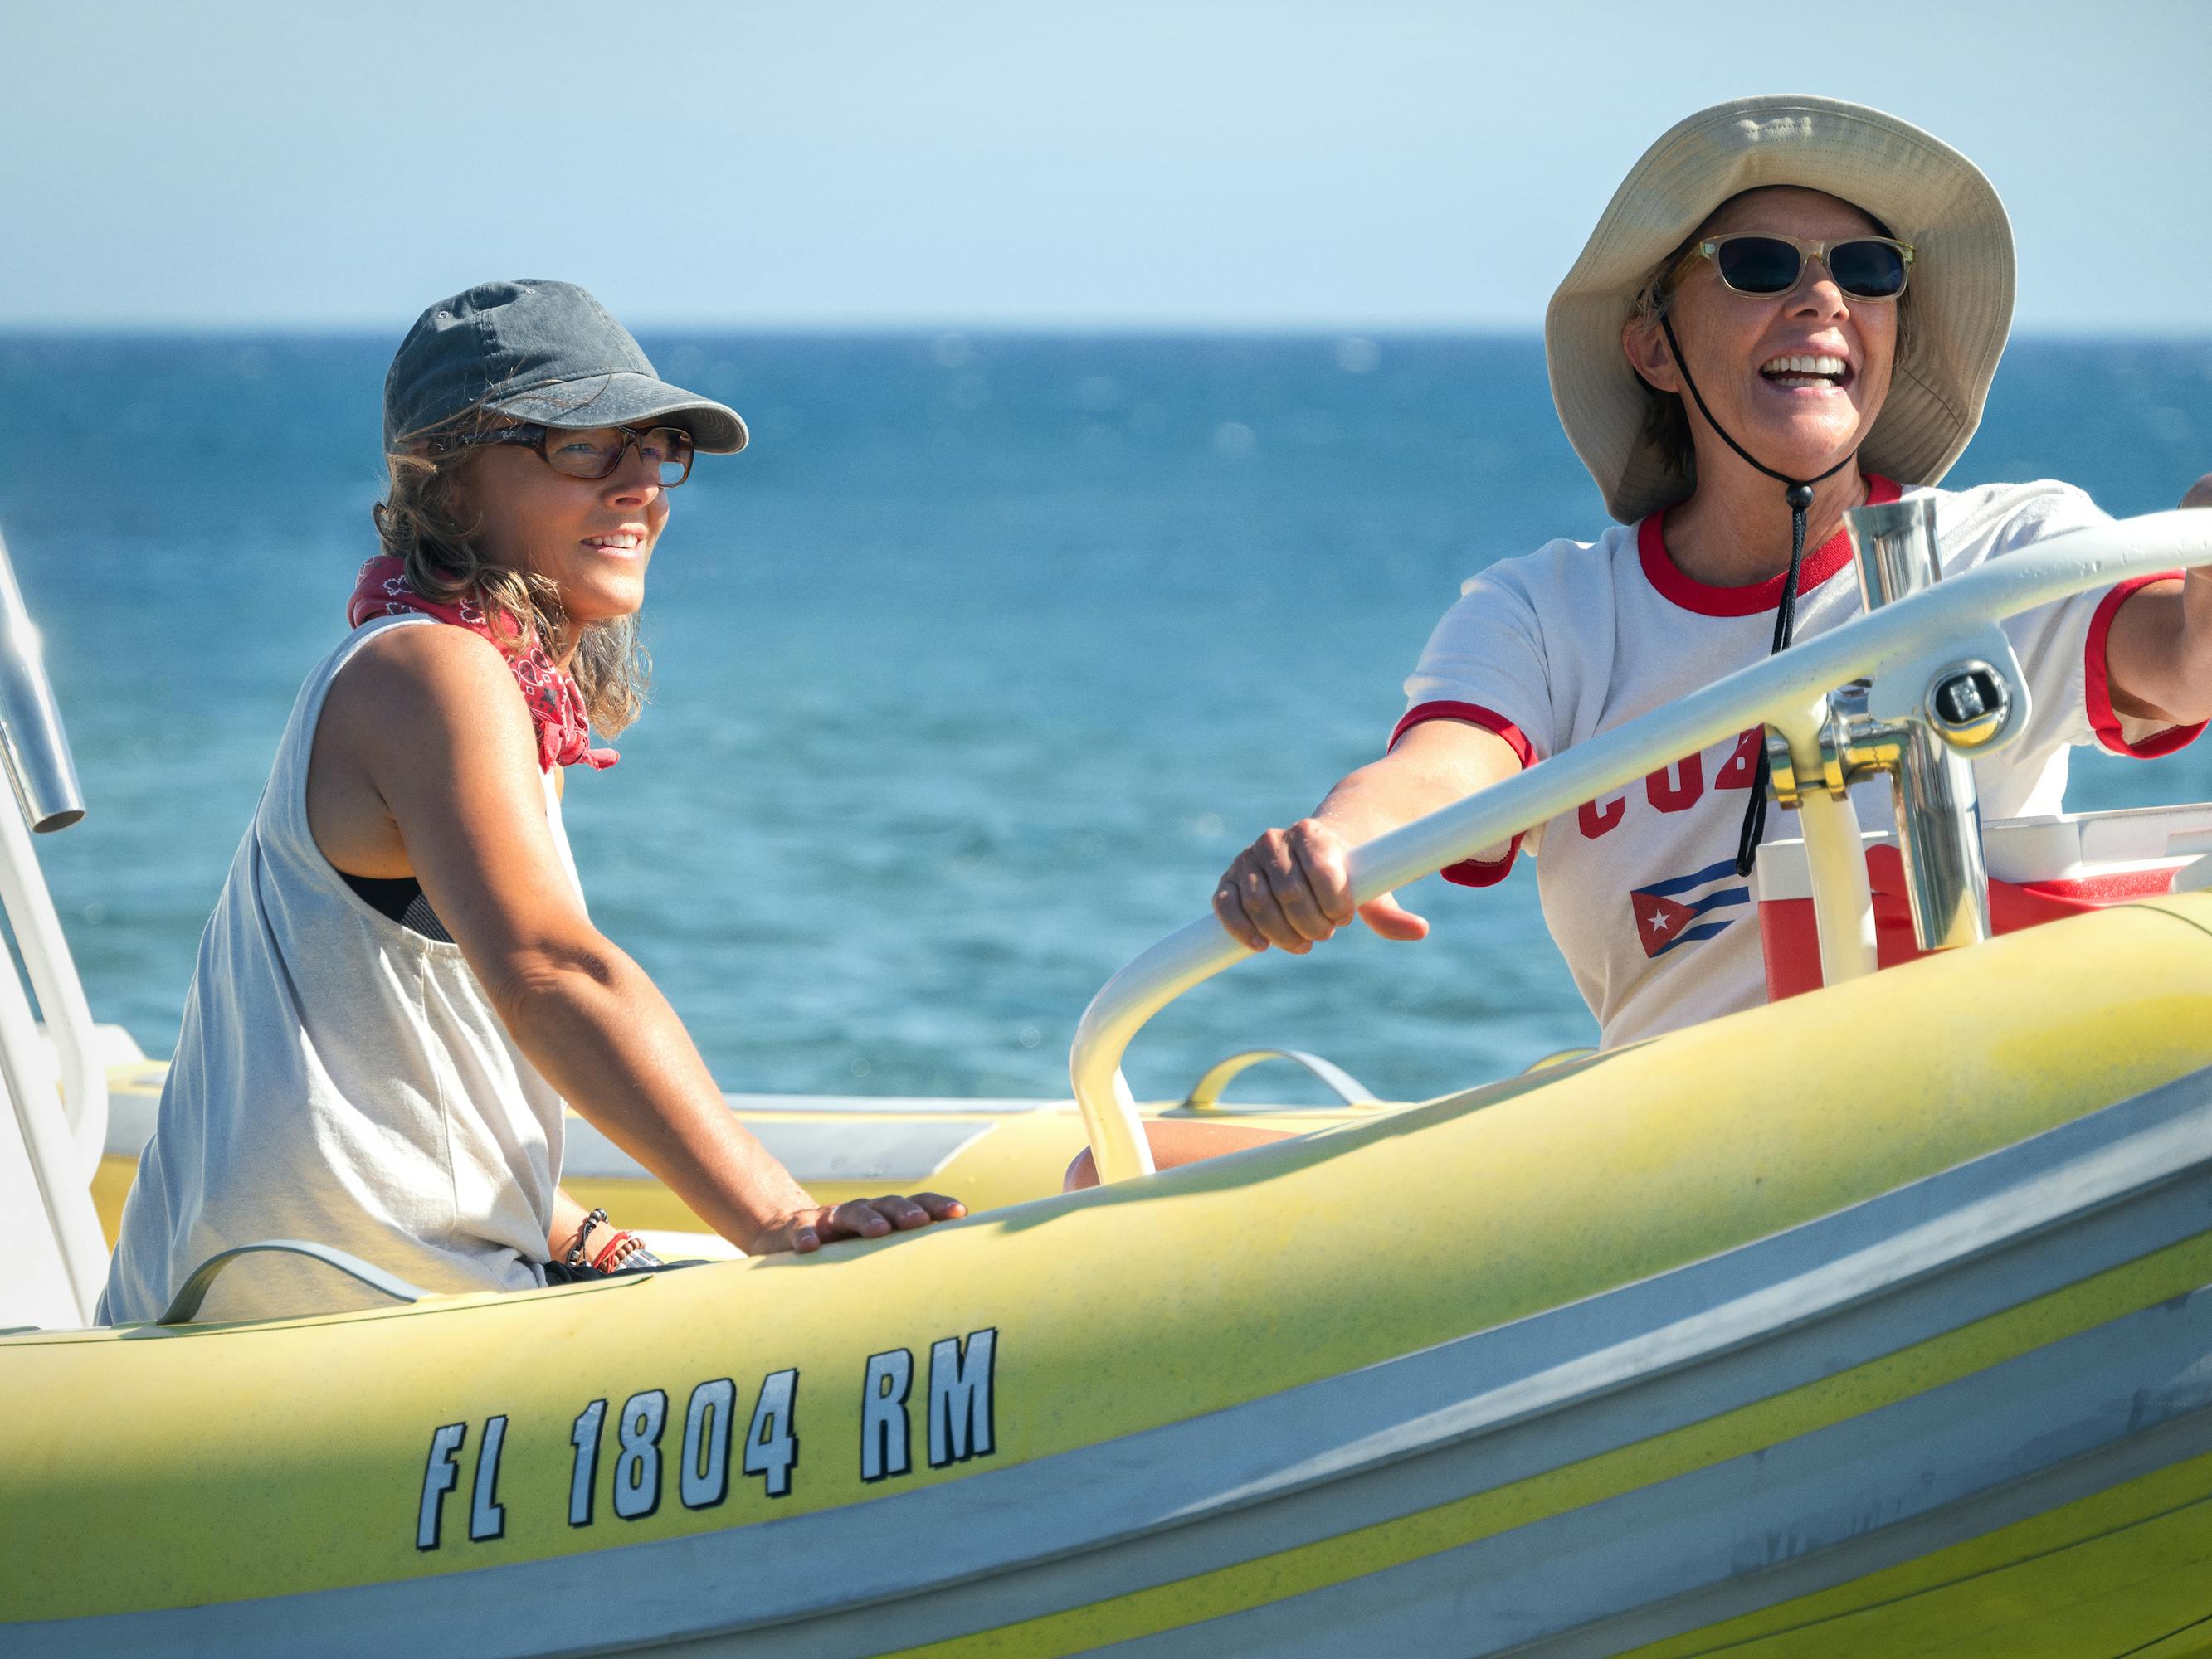 Bonnie Stoll (Jodie Foster) and Diana Nyad (Annette Bening) sit in a yellow boat on a sunny day.